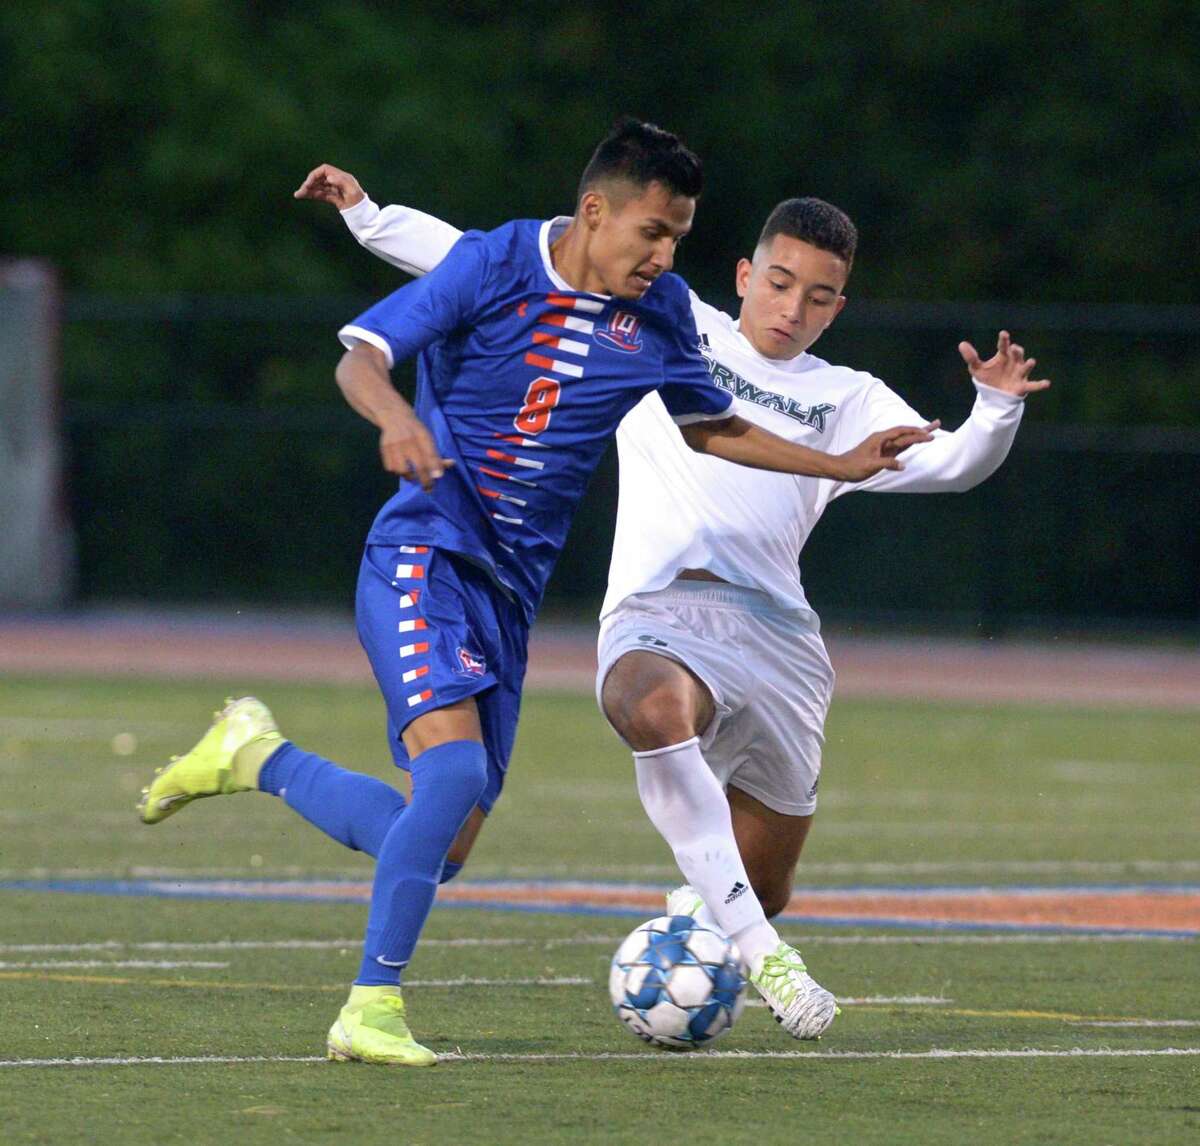 Danbury's Jeremy Garcia (8) and Norwalk's Mateo Cano (9) battle for the ball in the boys soccer game between Norwalk and Danbury high schools. Wednesday night, October 7, 2020, at Danbury High School, Danbury, Conn.